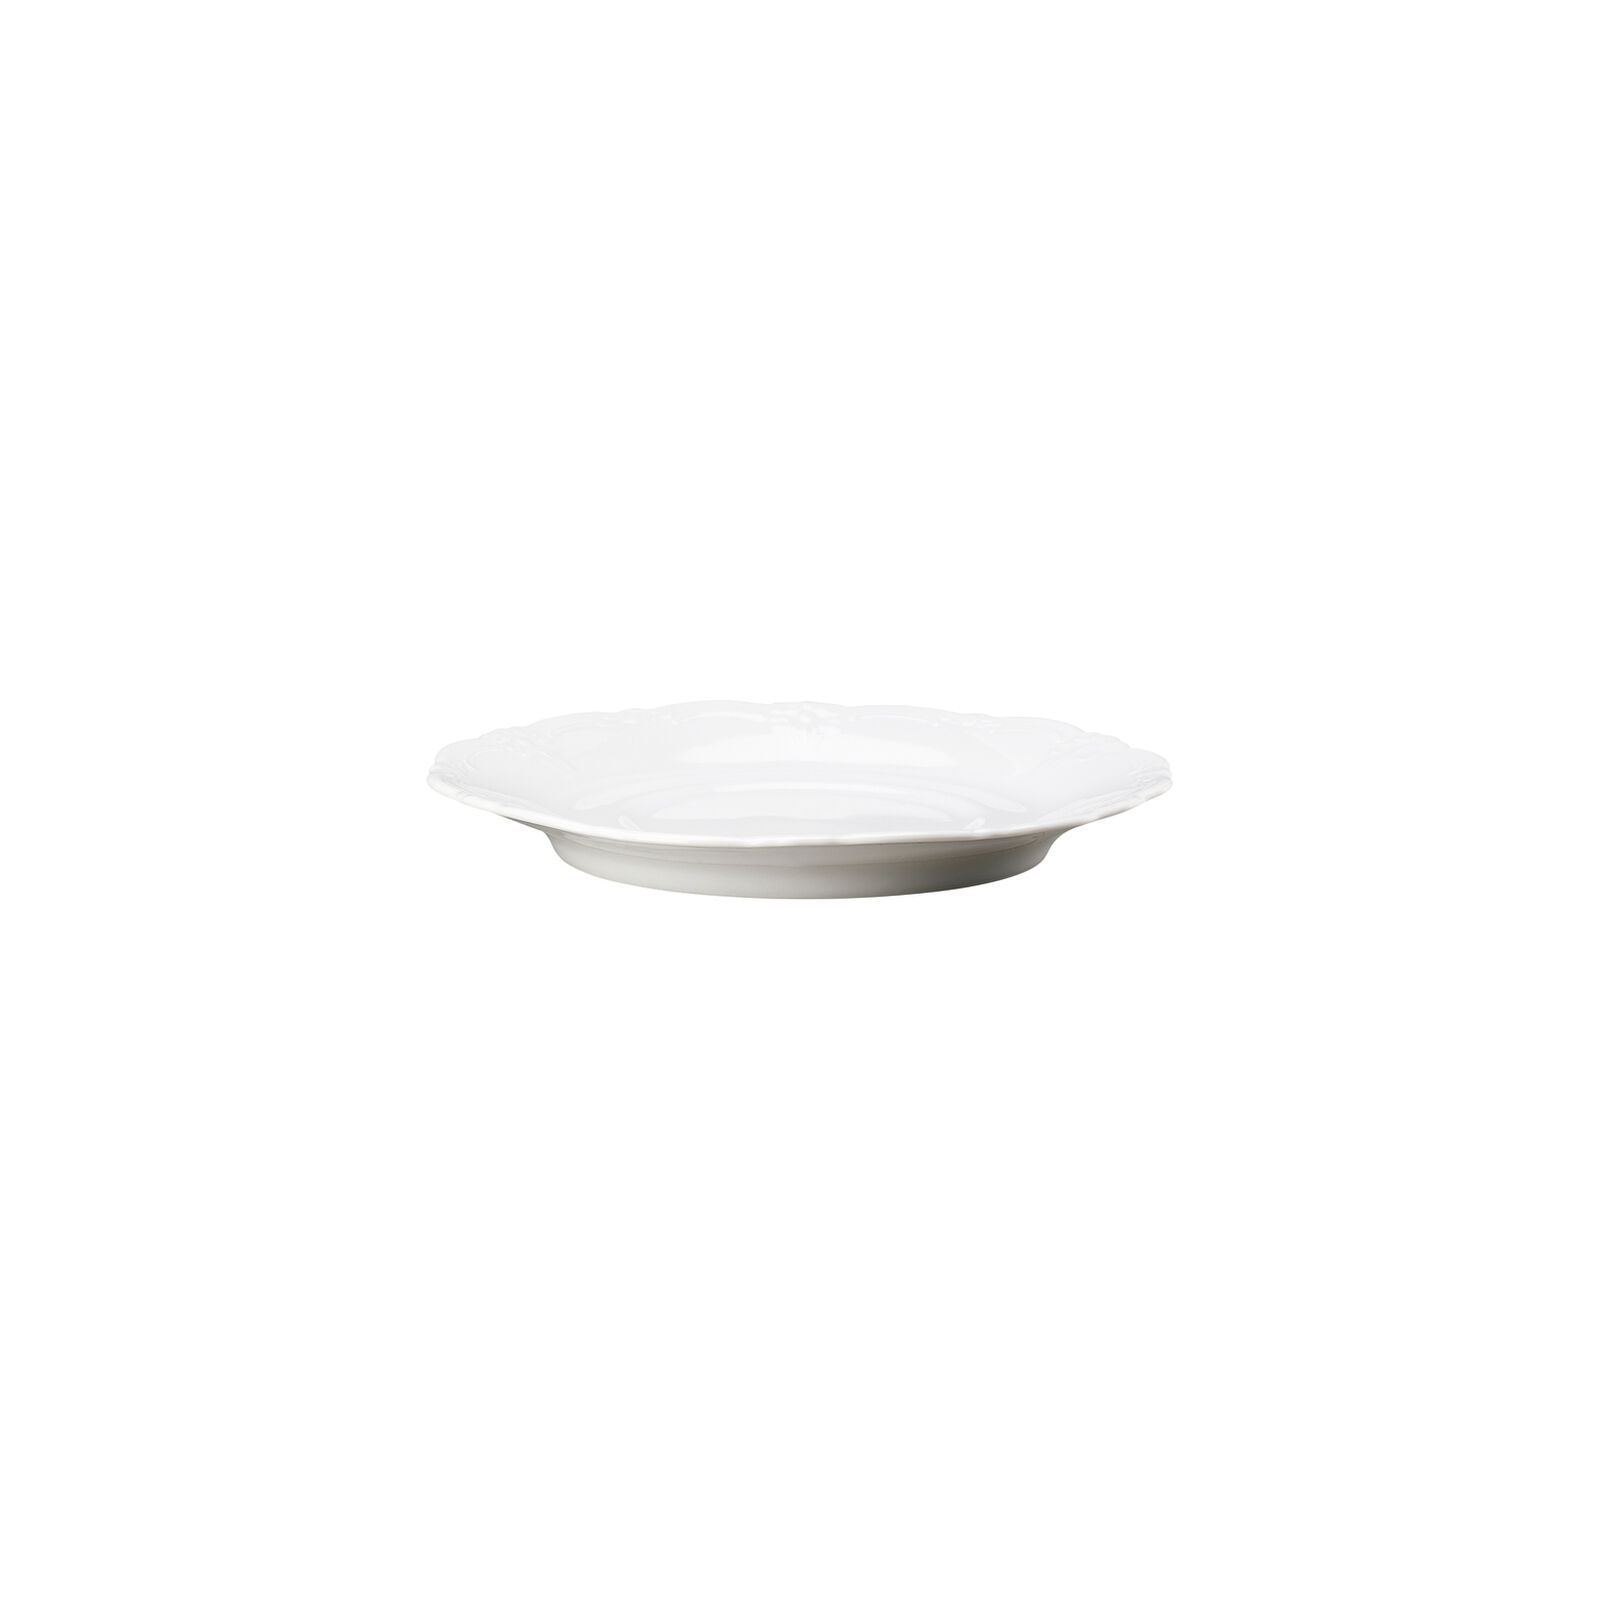 Weiss saucer, Creamsoup Hutschenreuther Baronesse Porcelain,